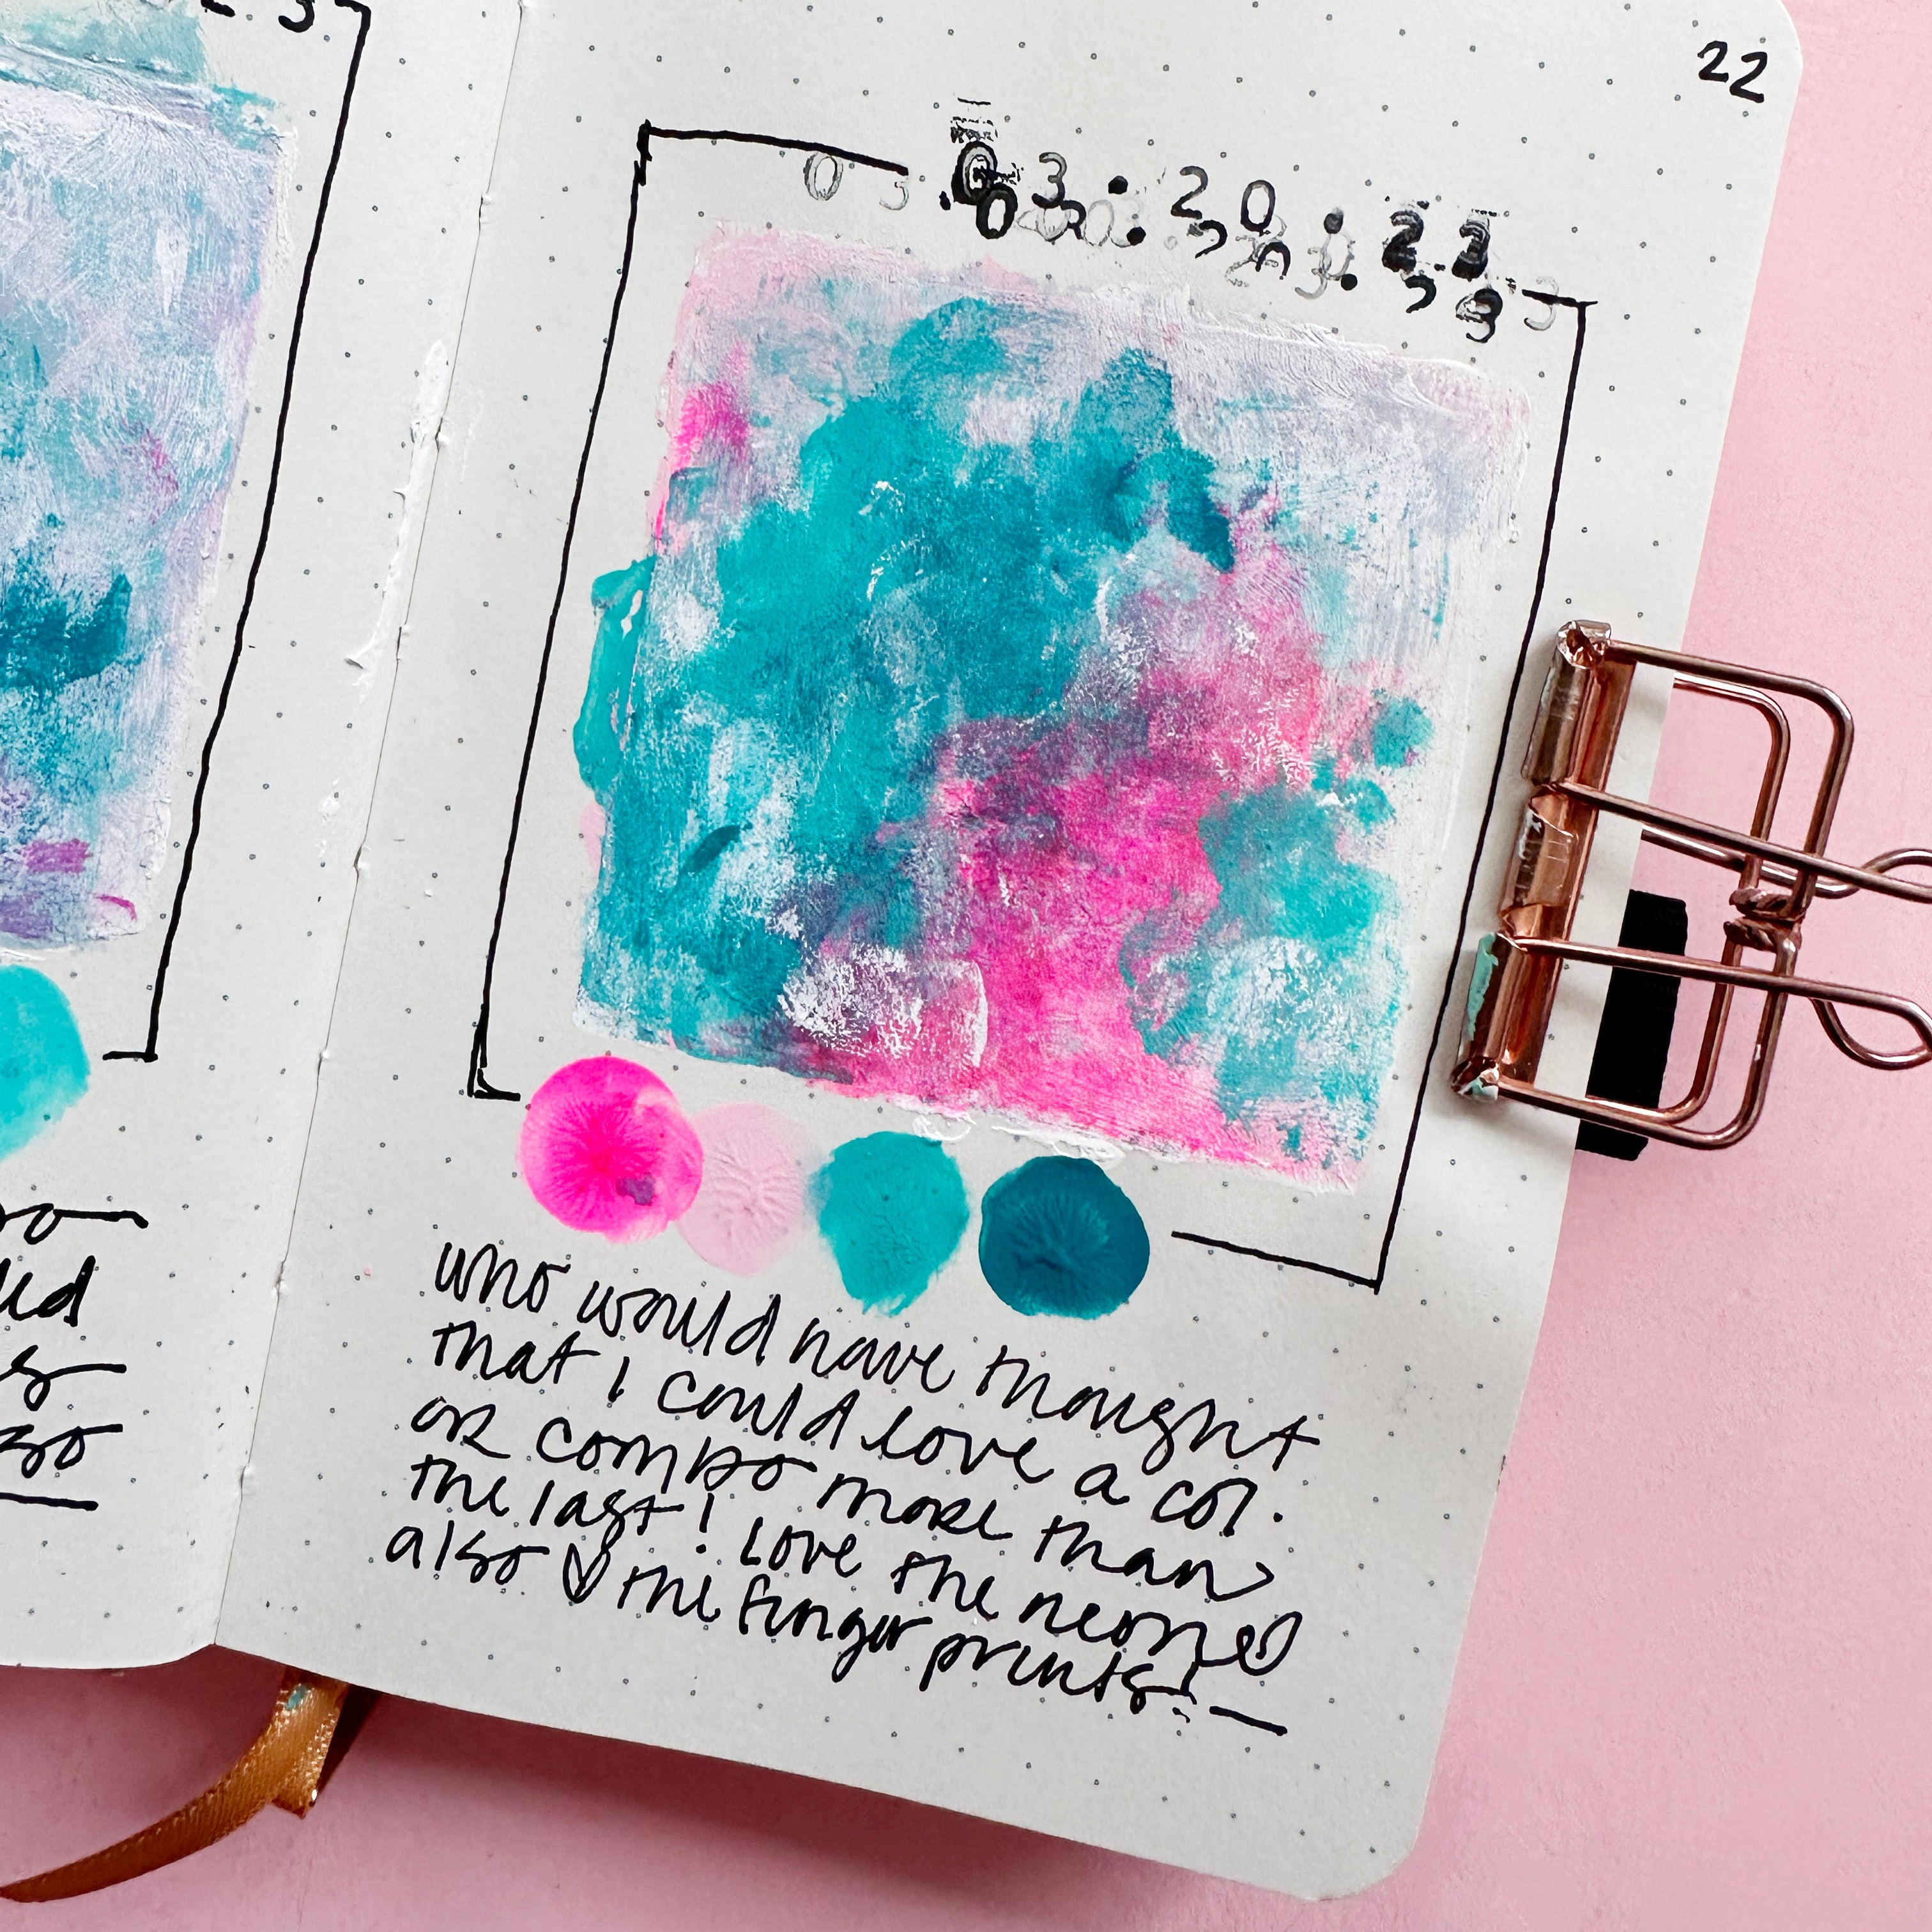 How to Make a DIY Wet Palette & Unlock Your Painting Skills